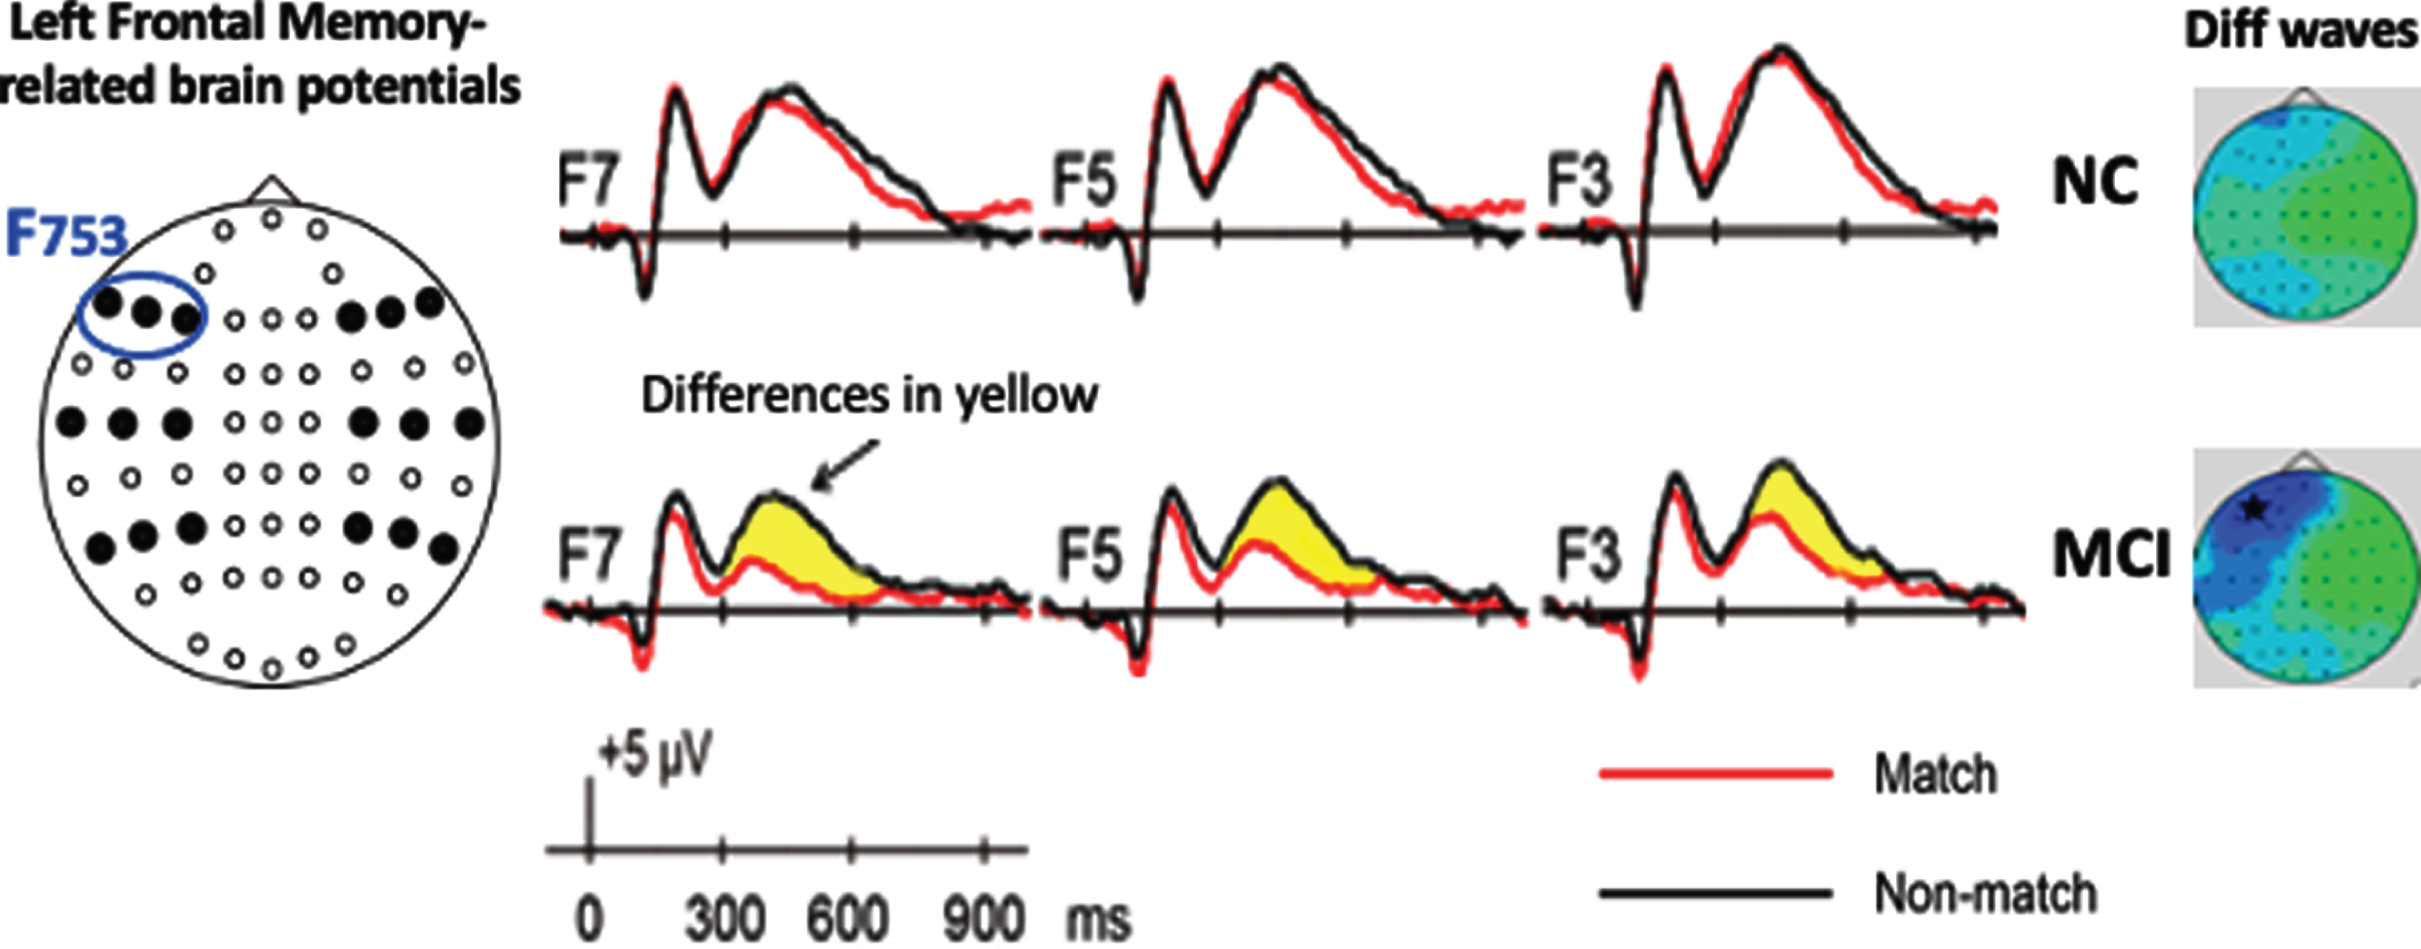 A. F753 is averaged left frontal memory-related potentials of F3, F5, and F7. The blue circle indicates location of left frontal sites from left to right F7, F5, and F3. Baseline memory-related potentials and topographical maps in Normal Cognition (NC) and patients with MCI groups (adapted from [12]). The yellow highlight indicates the differences (diff) of memory-related potentials (Target Match – Nontargets Nonmatch).